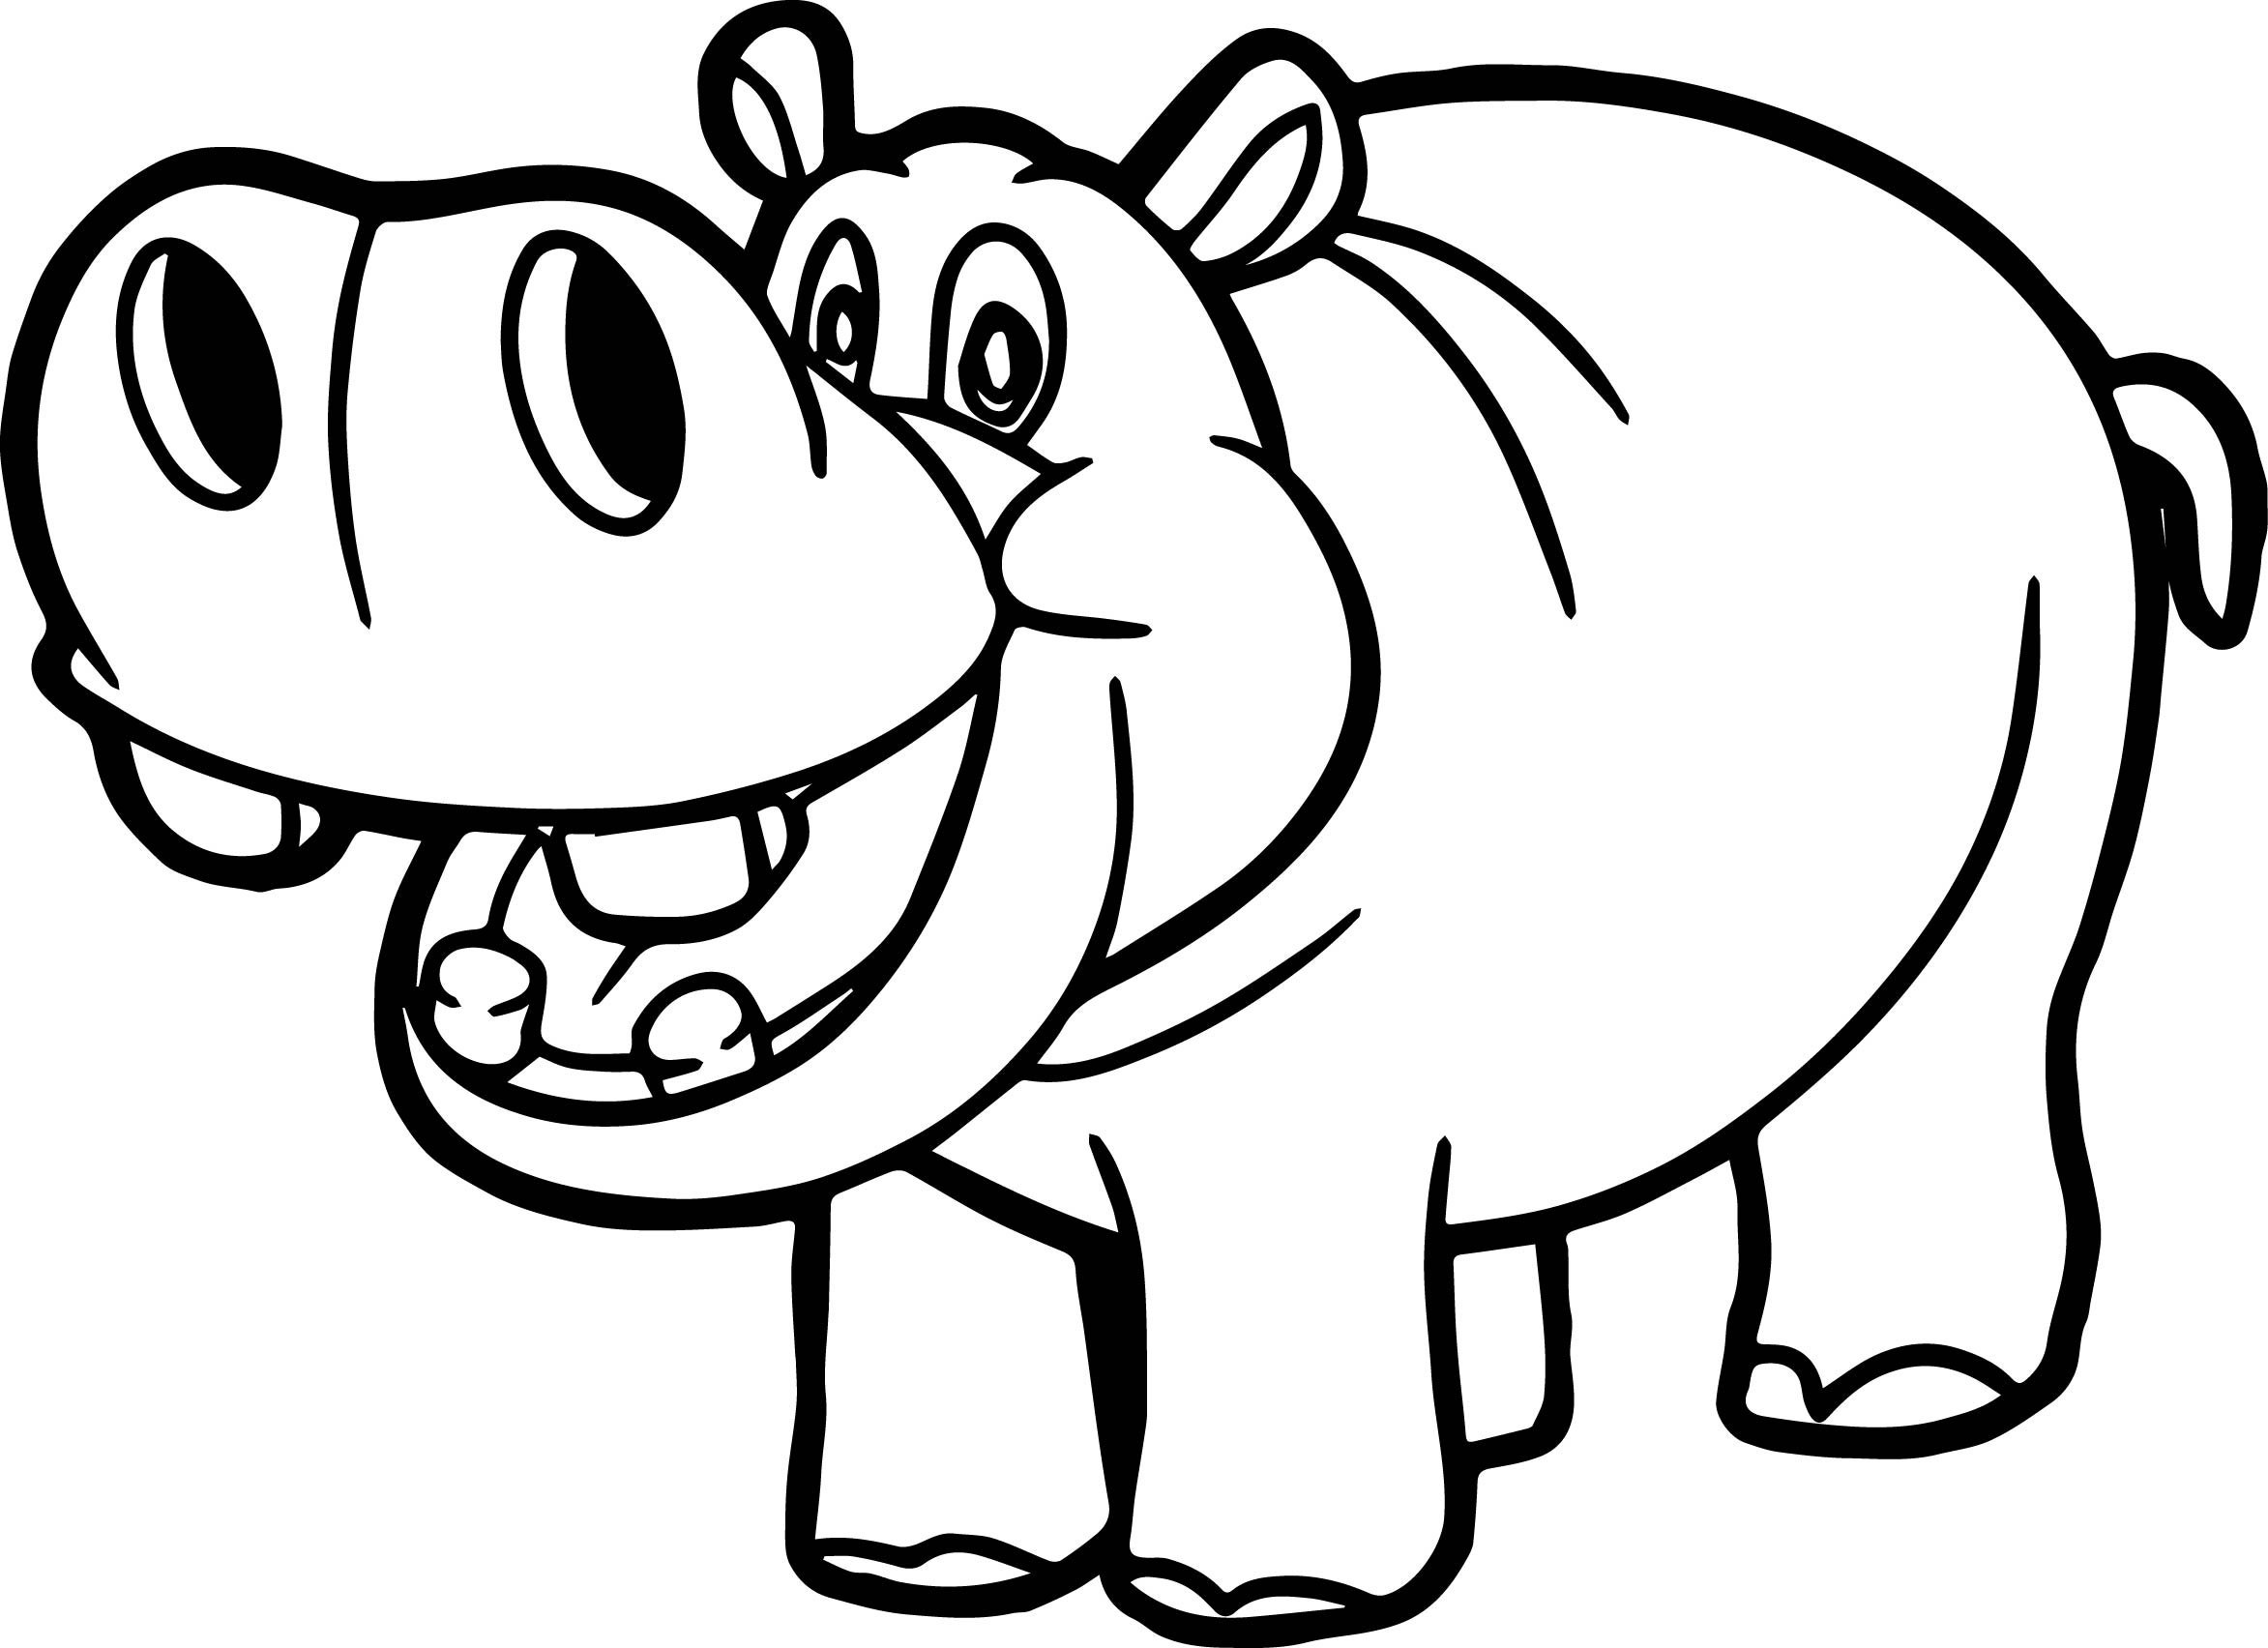 Printable Hippo Coloring Pages Pdf - Hippo Coloring Pages